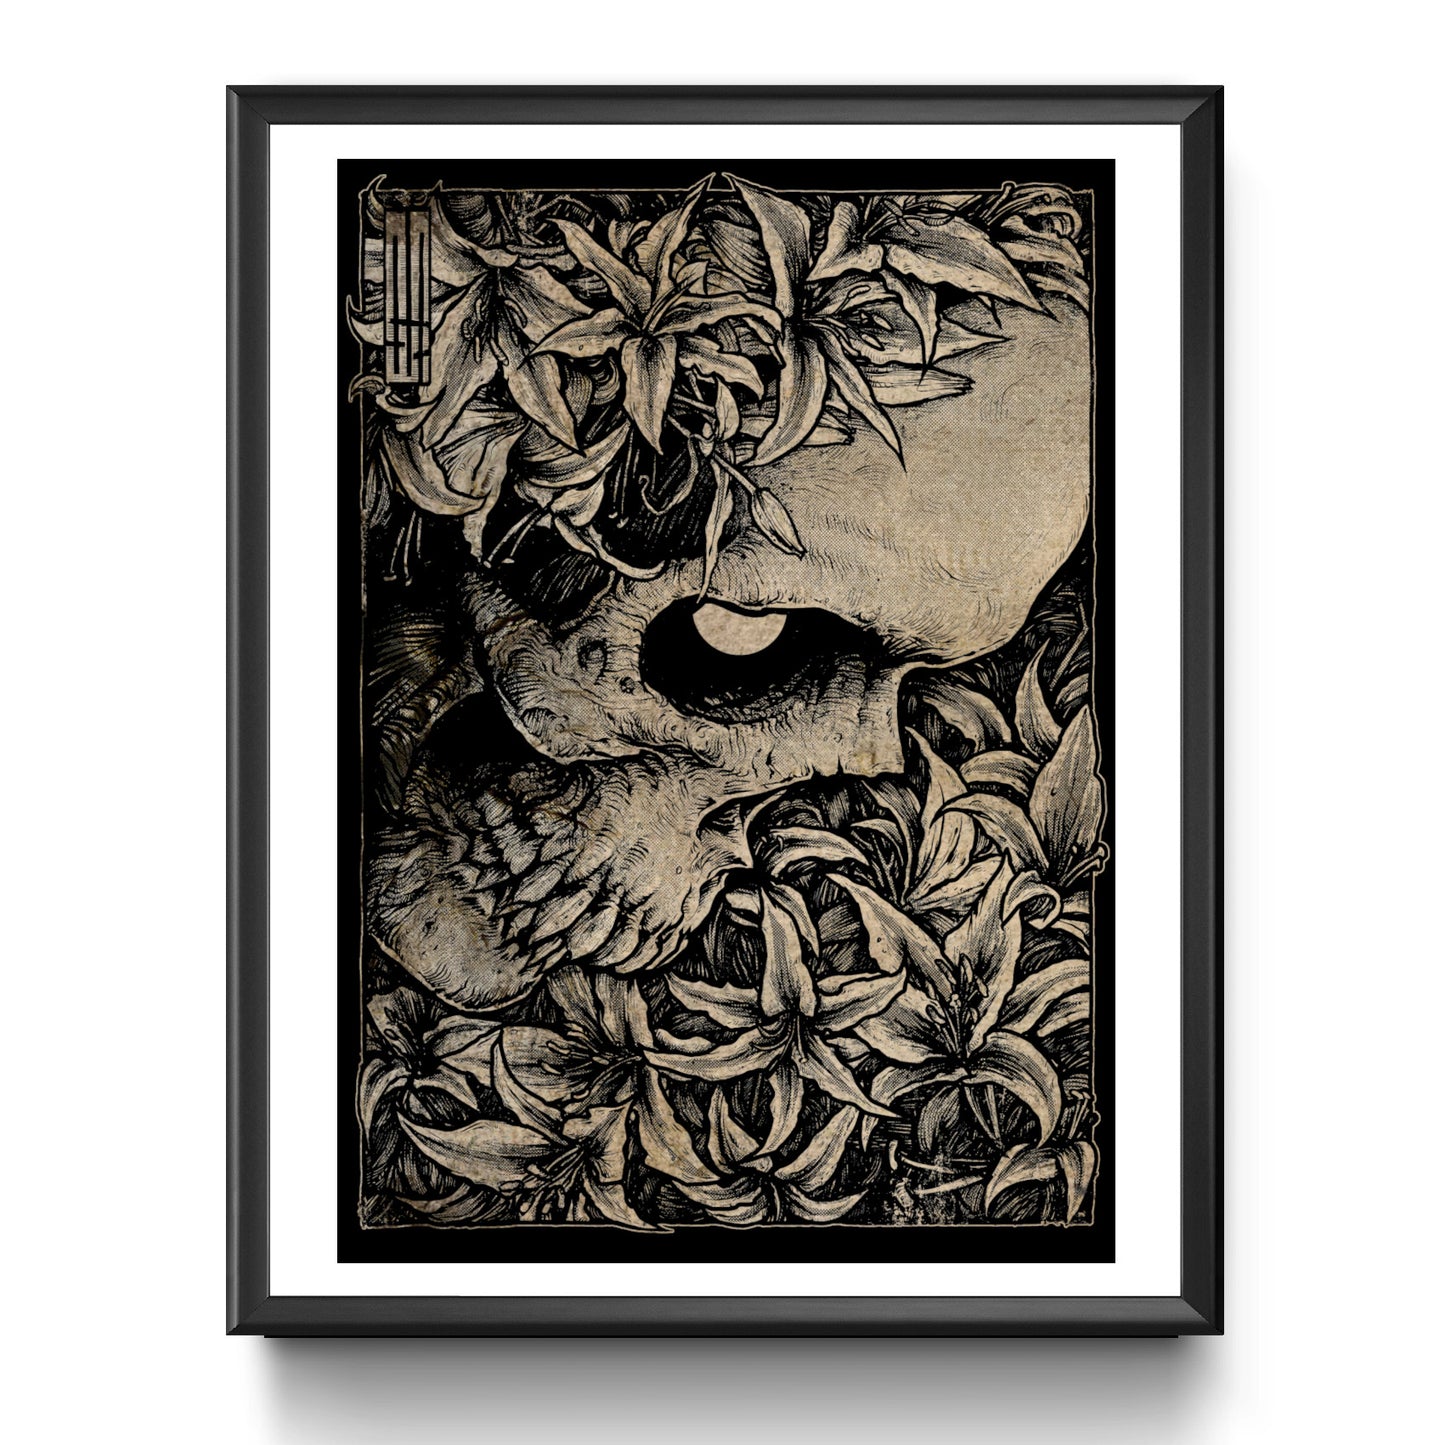 Rest In Pieces [Sepia] A4 Art Print